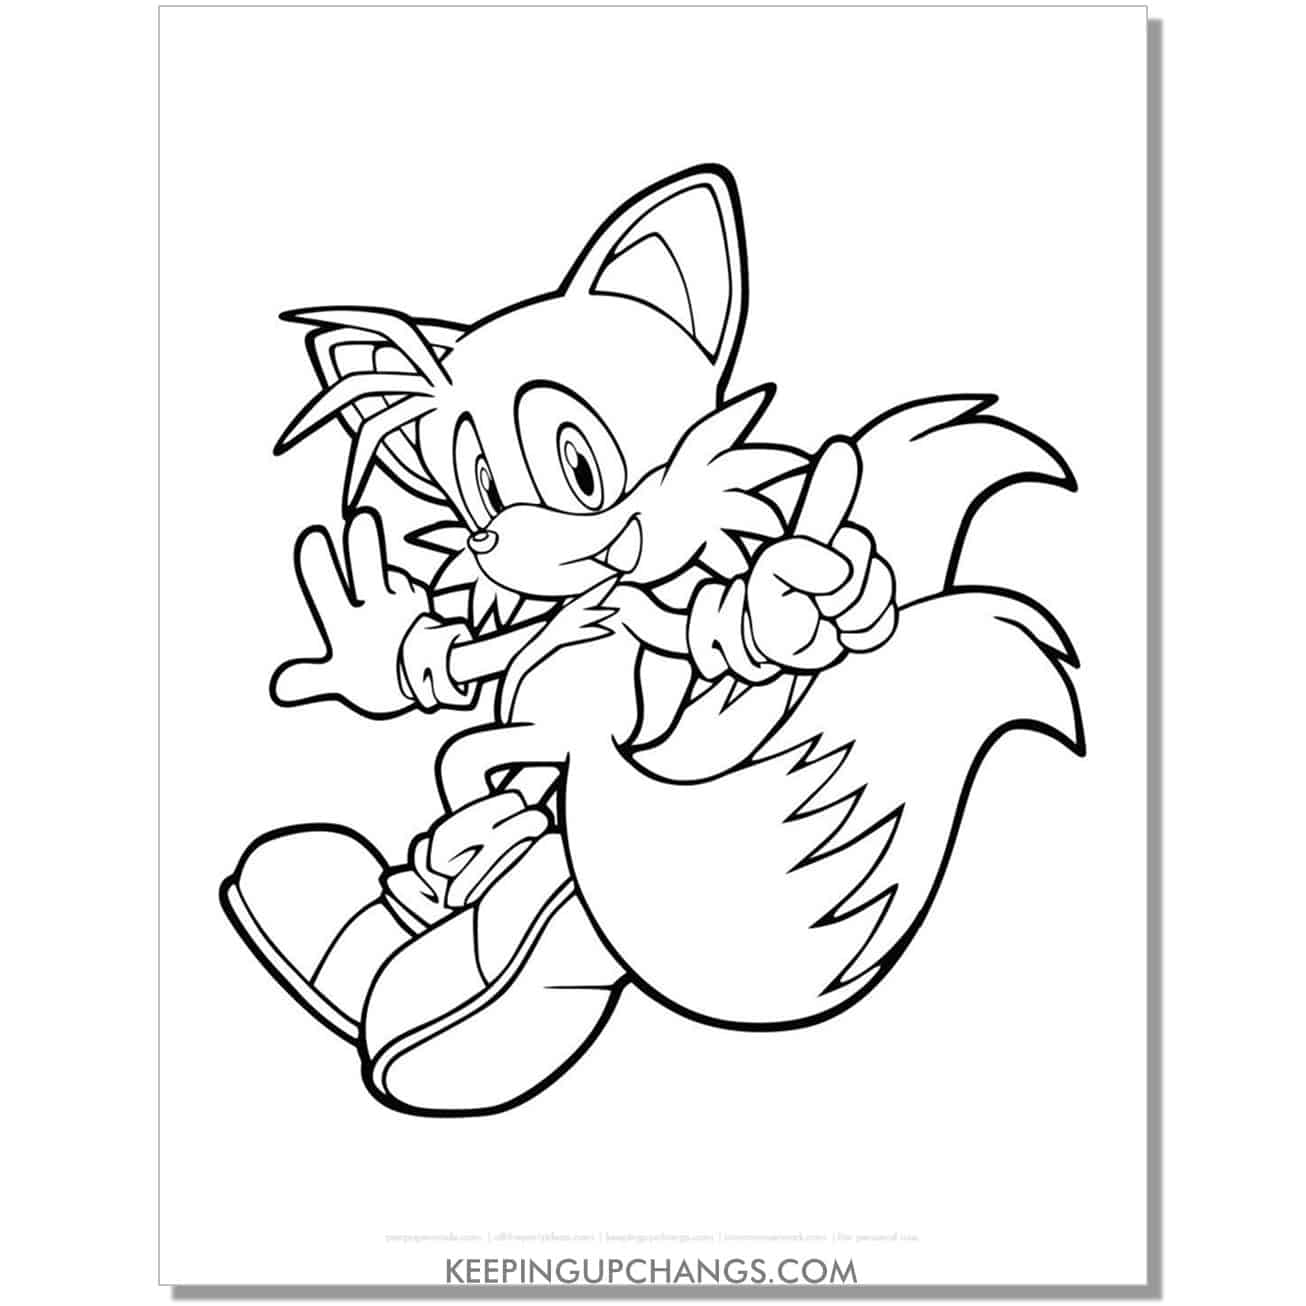 tails looking back sonic coloring page.